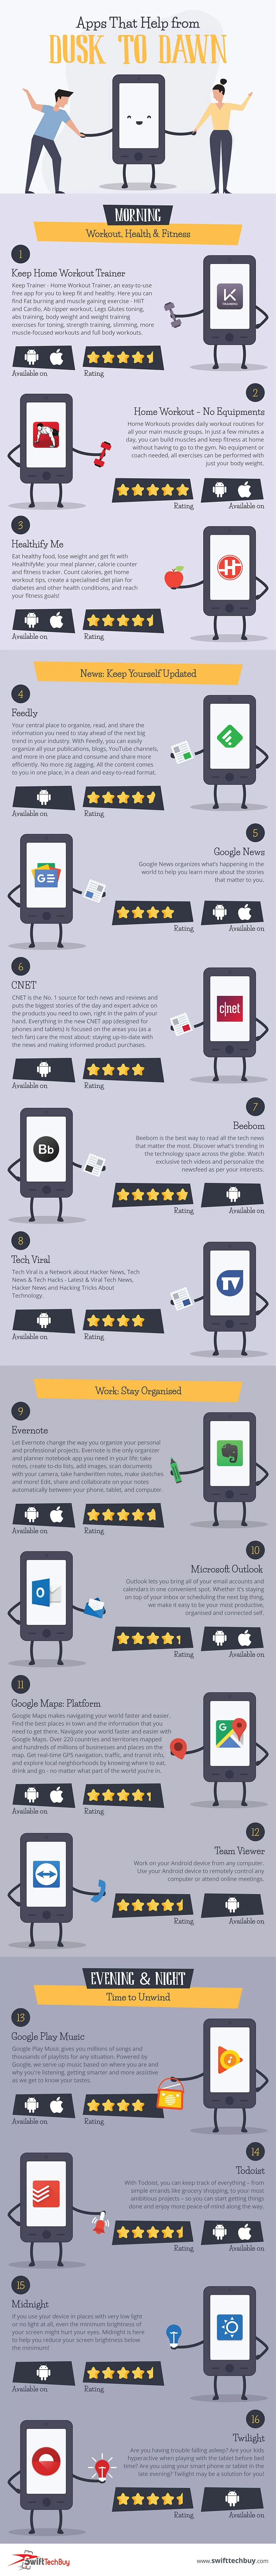 An Infographic on Android and iOS Apps That Help from Dusk to Dawn